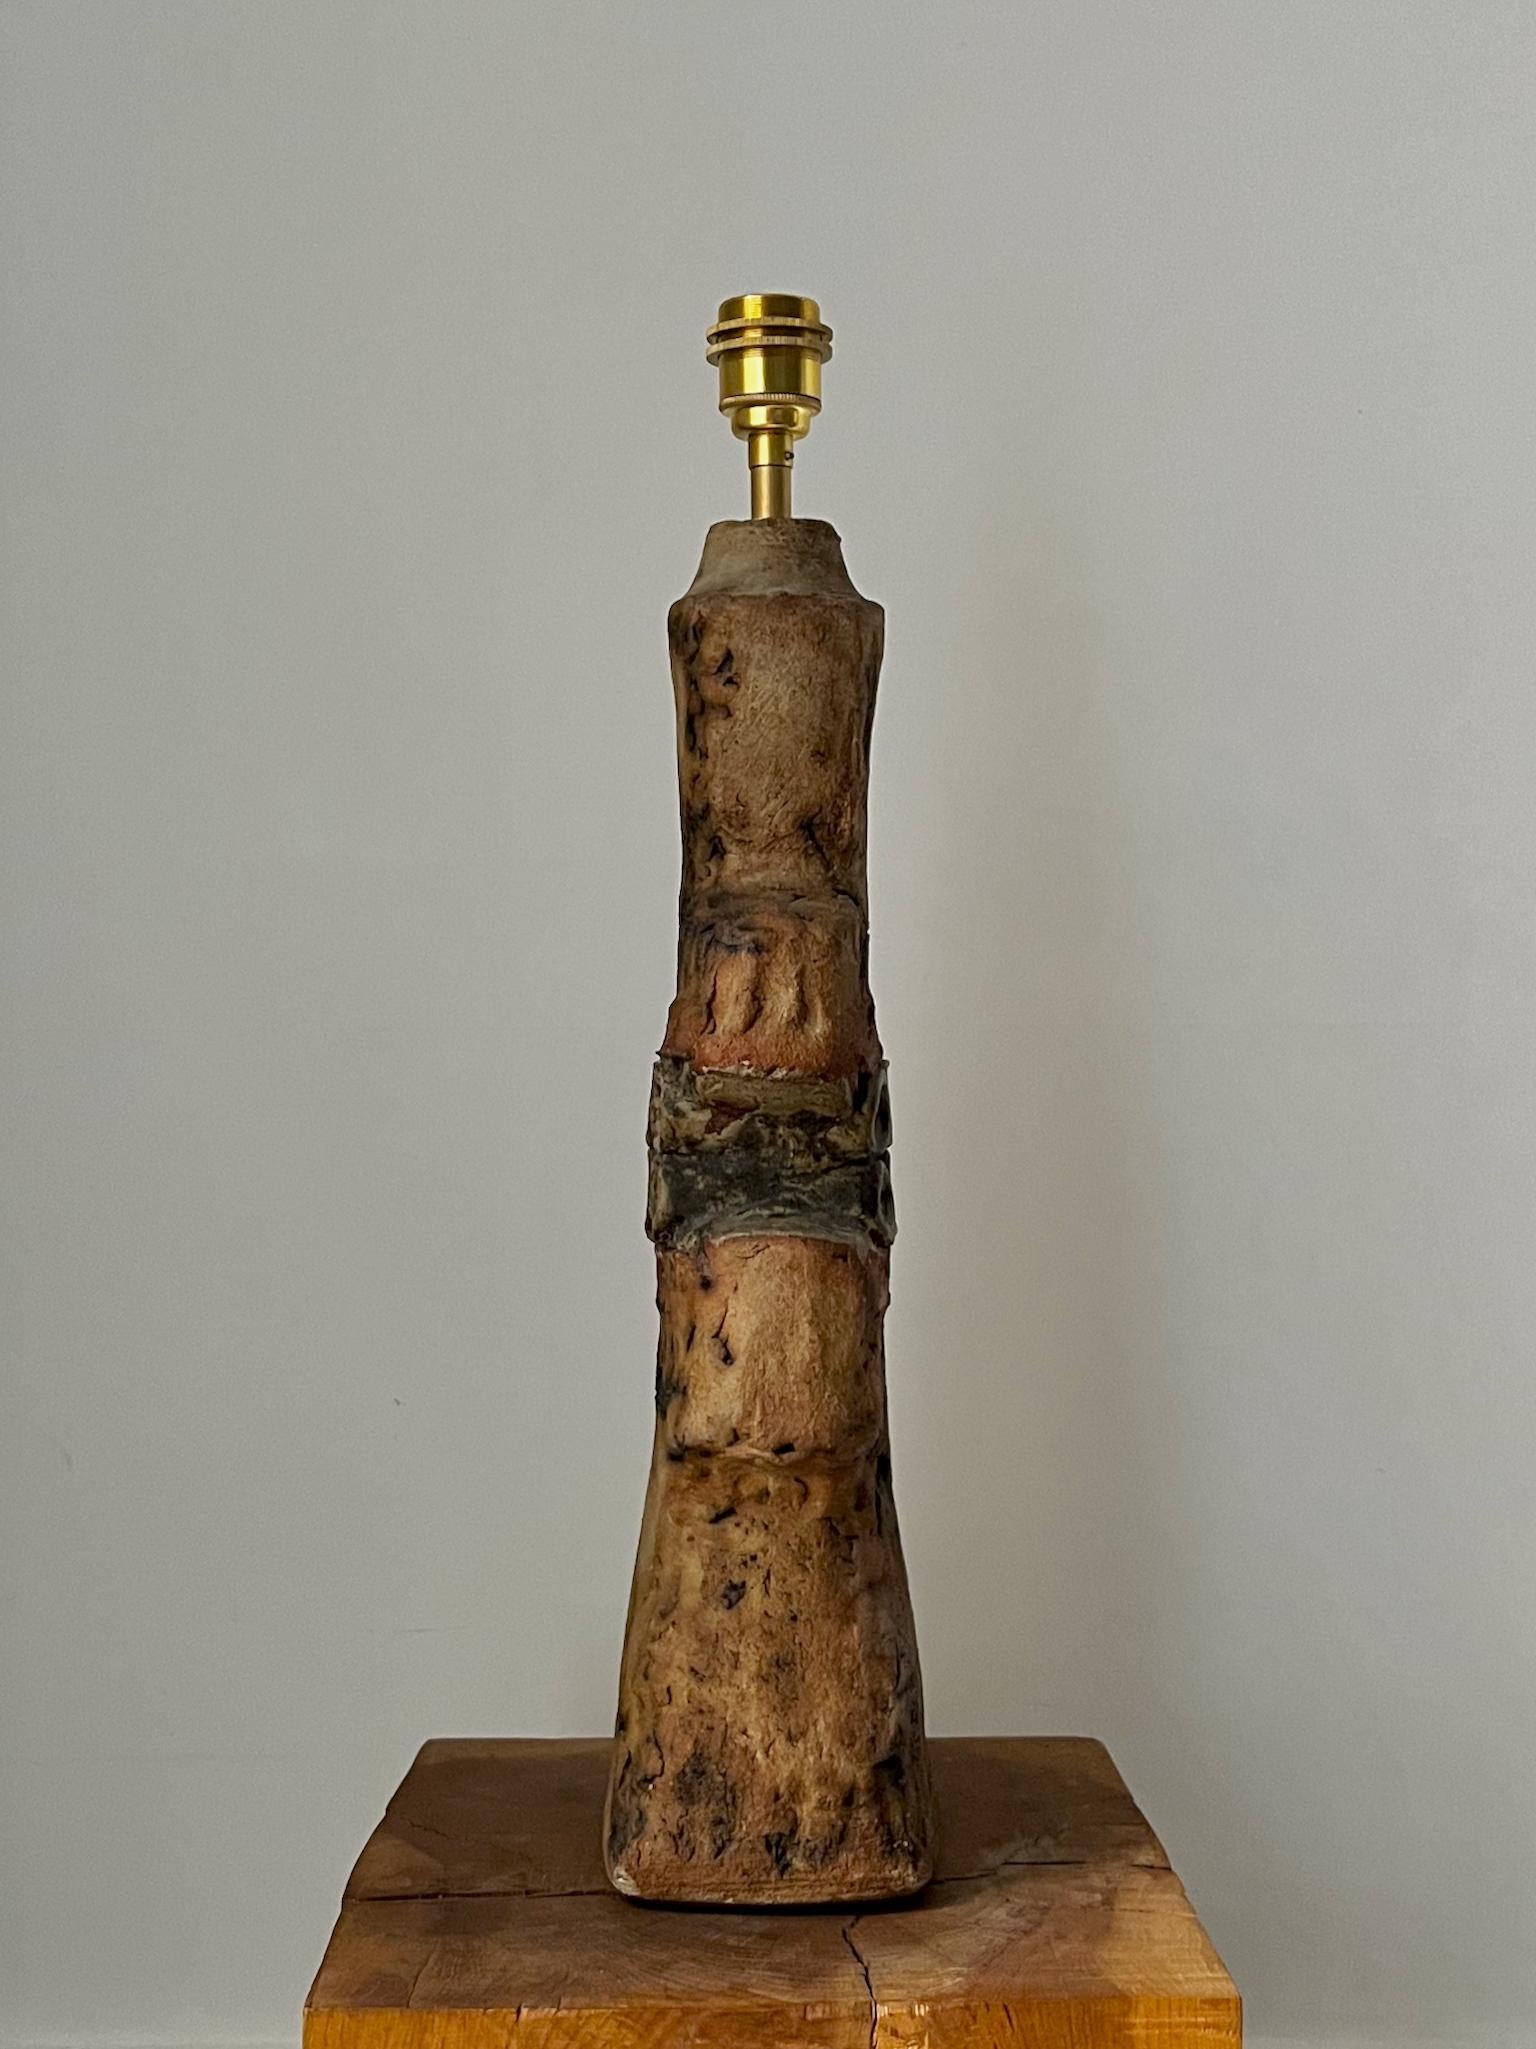 English Studio Ceramic Lamp in Natural Tones by Bernard Rooke, Mid-20th Century England For Sale